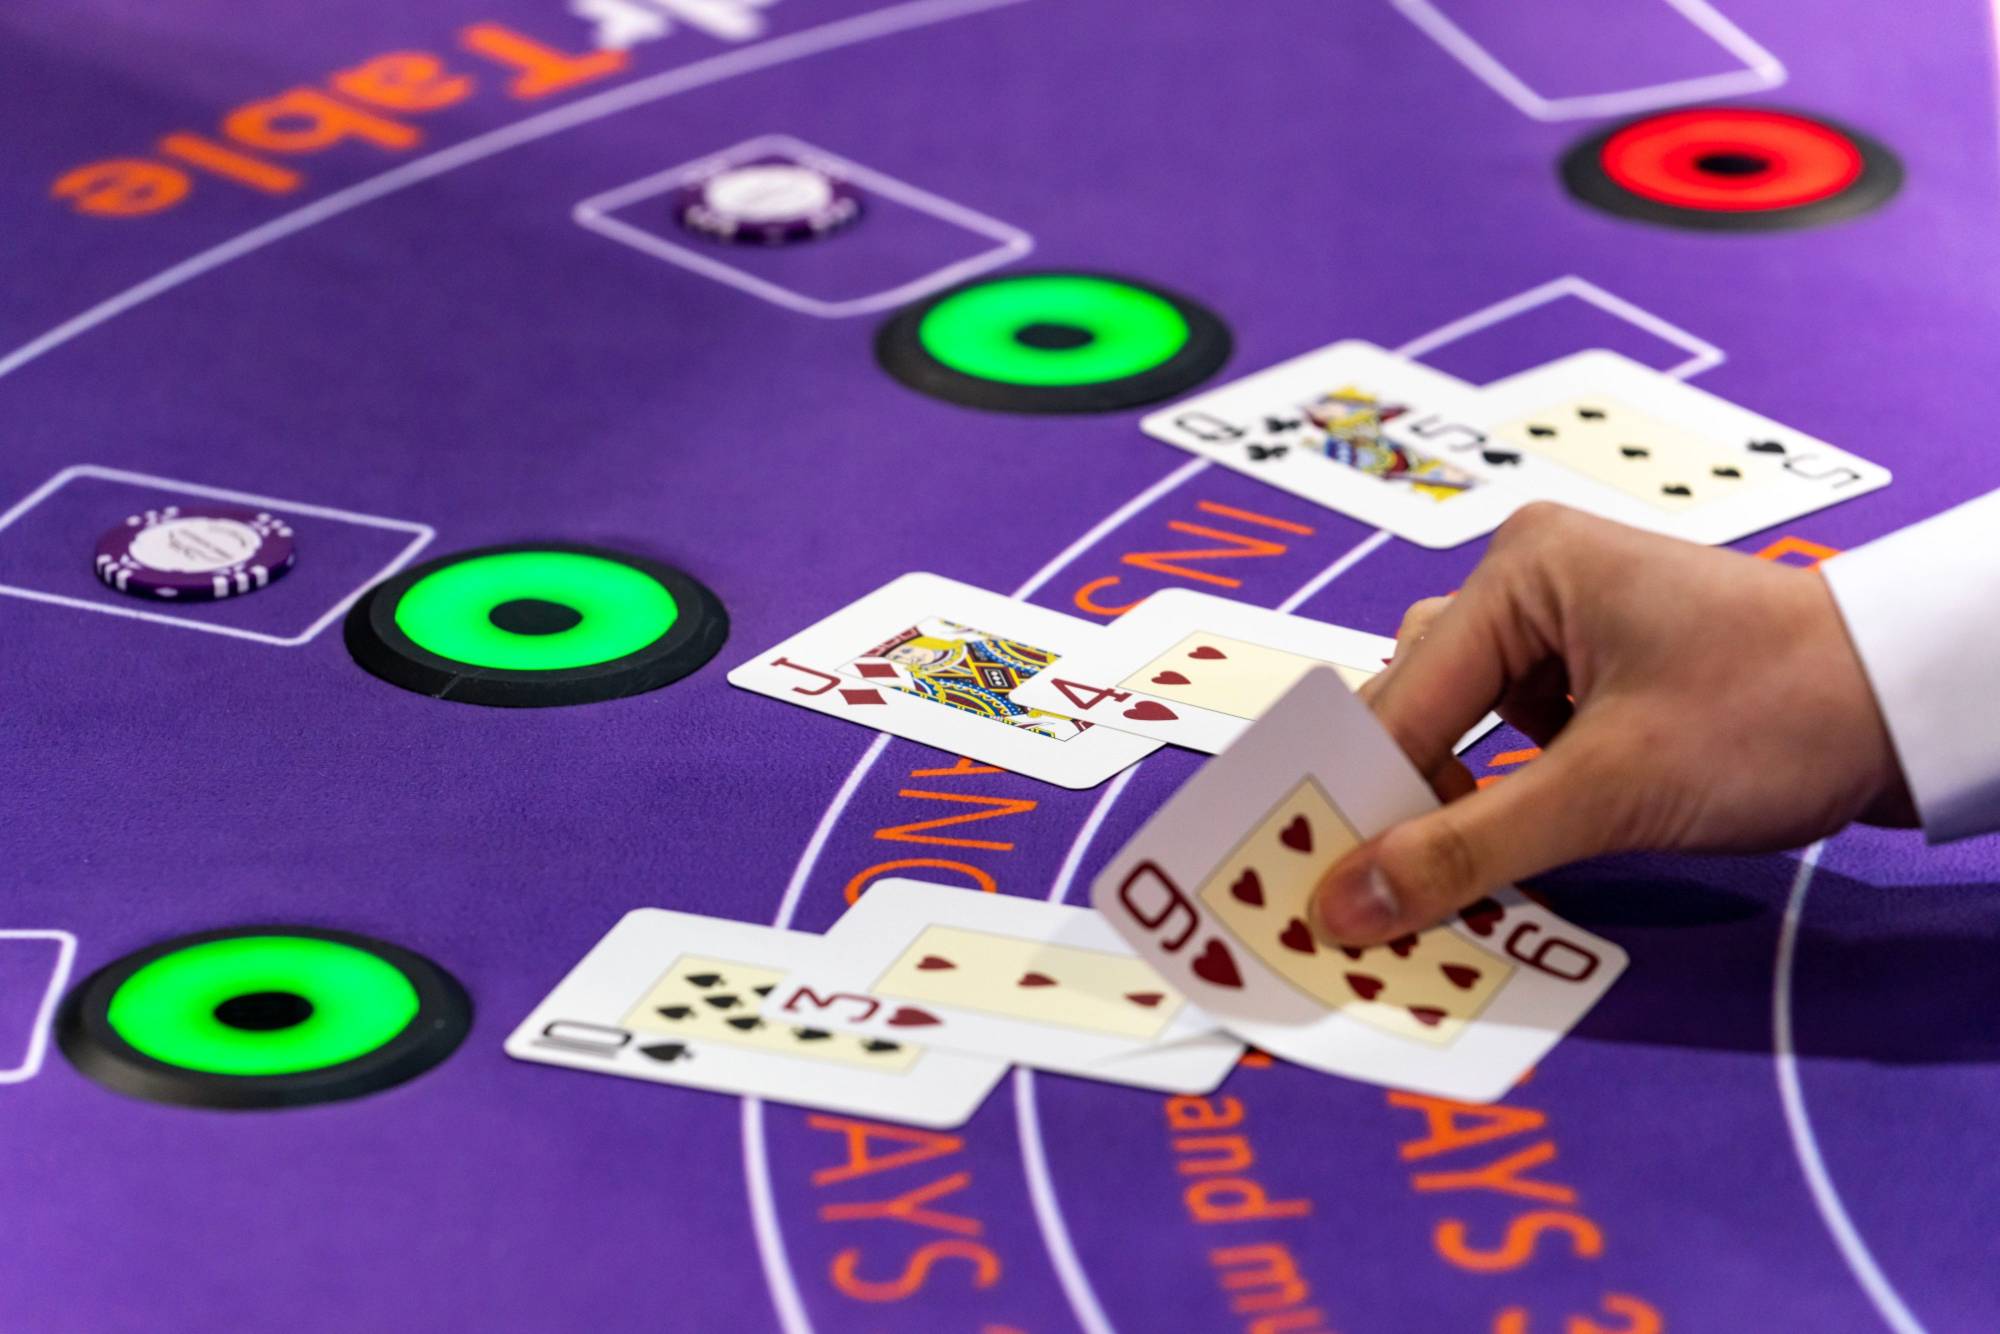 A blackjack table at the Global Gaming Expo Asia in Macao in 2018 | BLOOMBERG